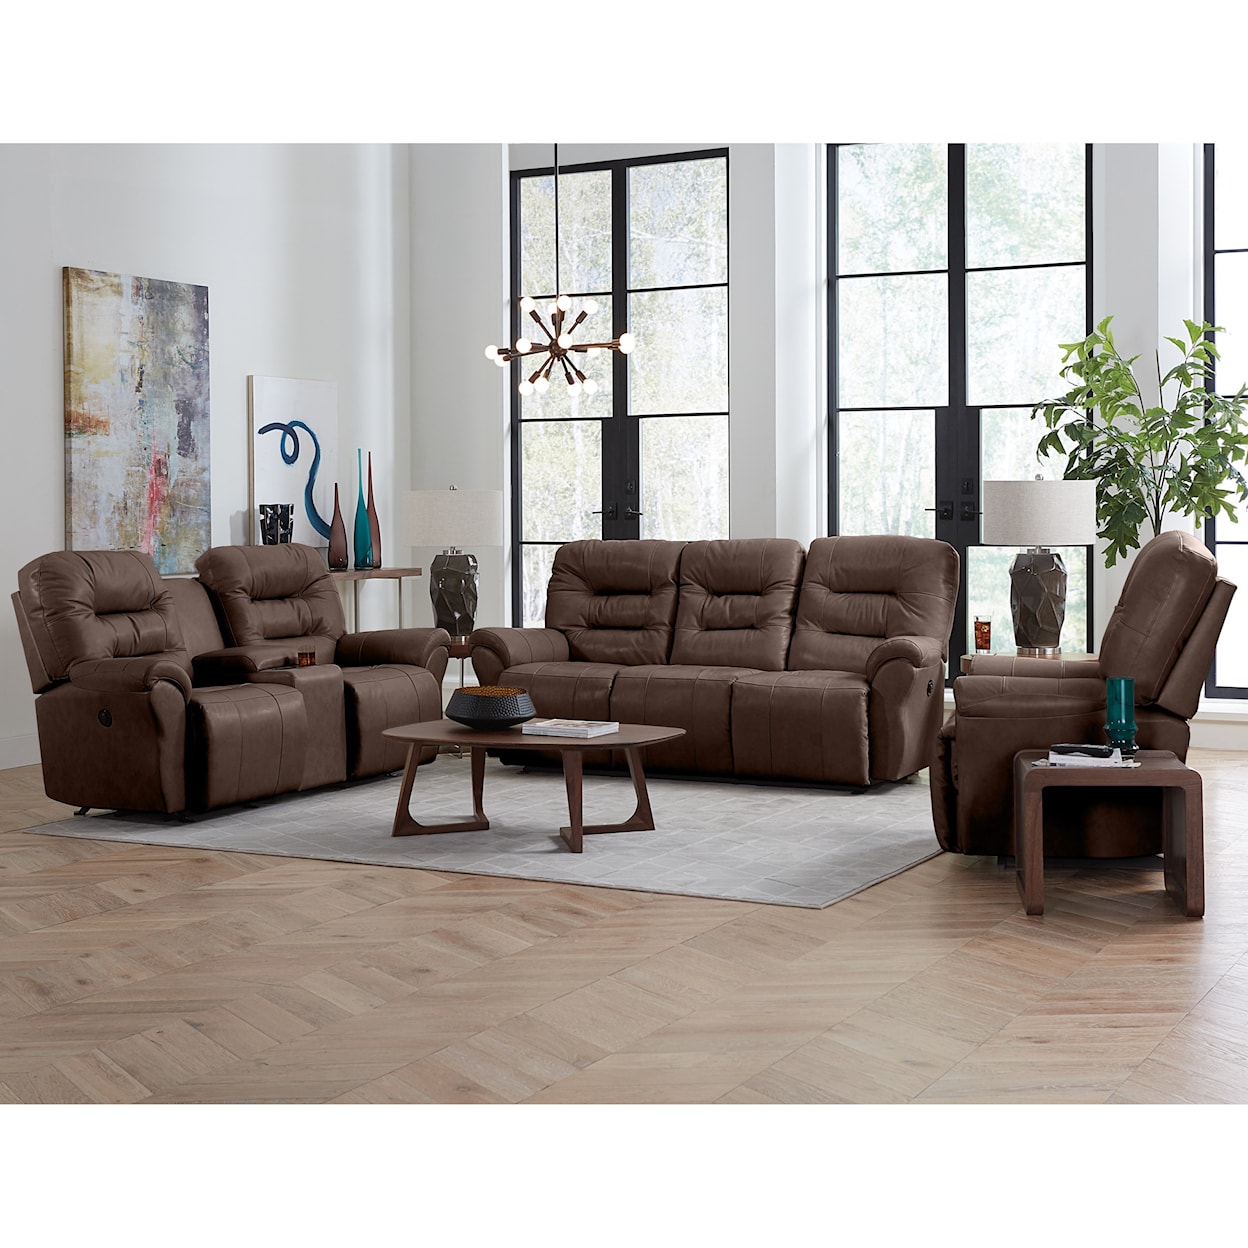 Best Home Furnishings Unity Space Saver Console Reclining Loveseat